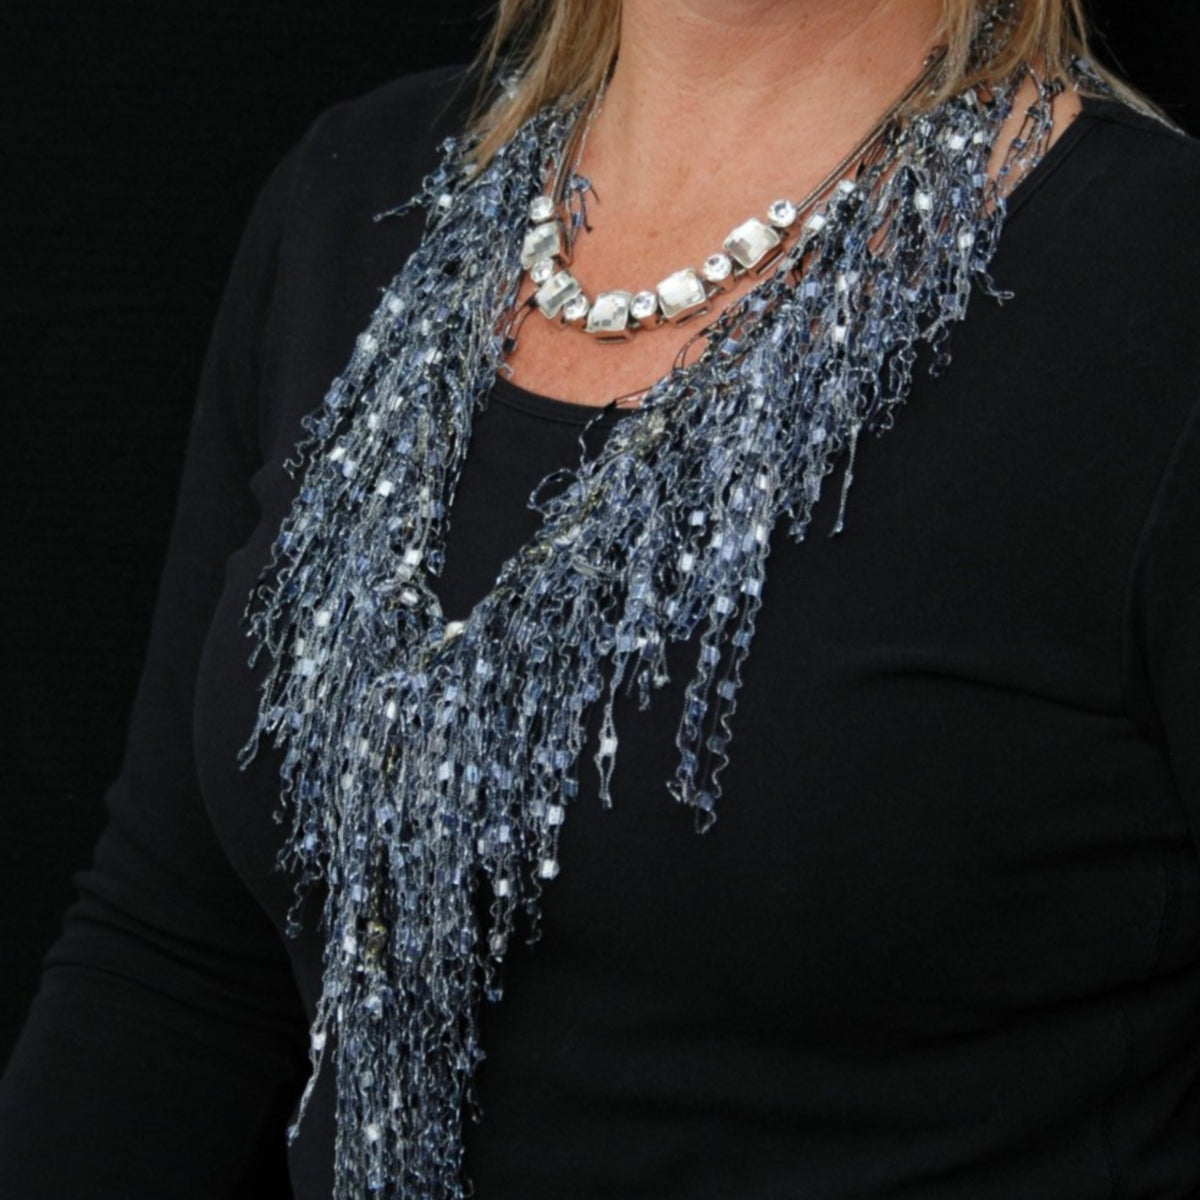 Close up of model wearing black top with silver rhinestone necklace and lack and whit scarf necklace